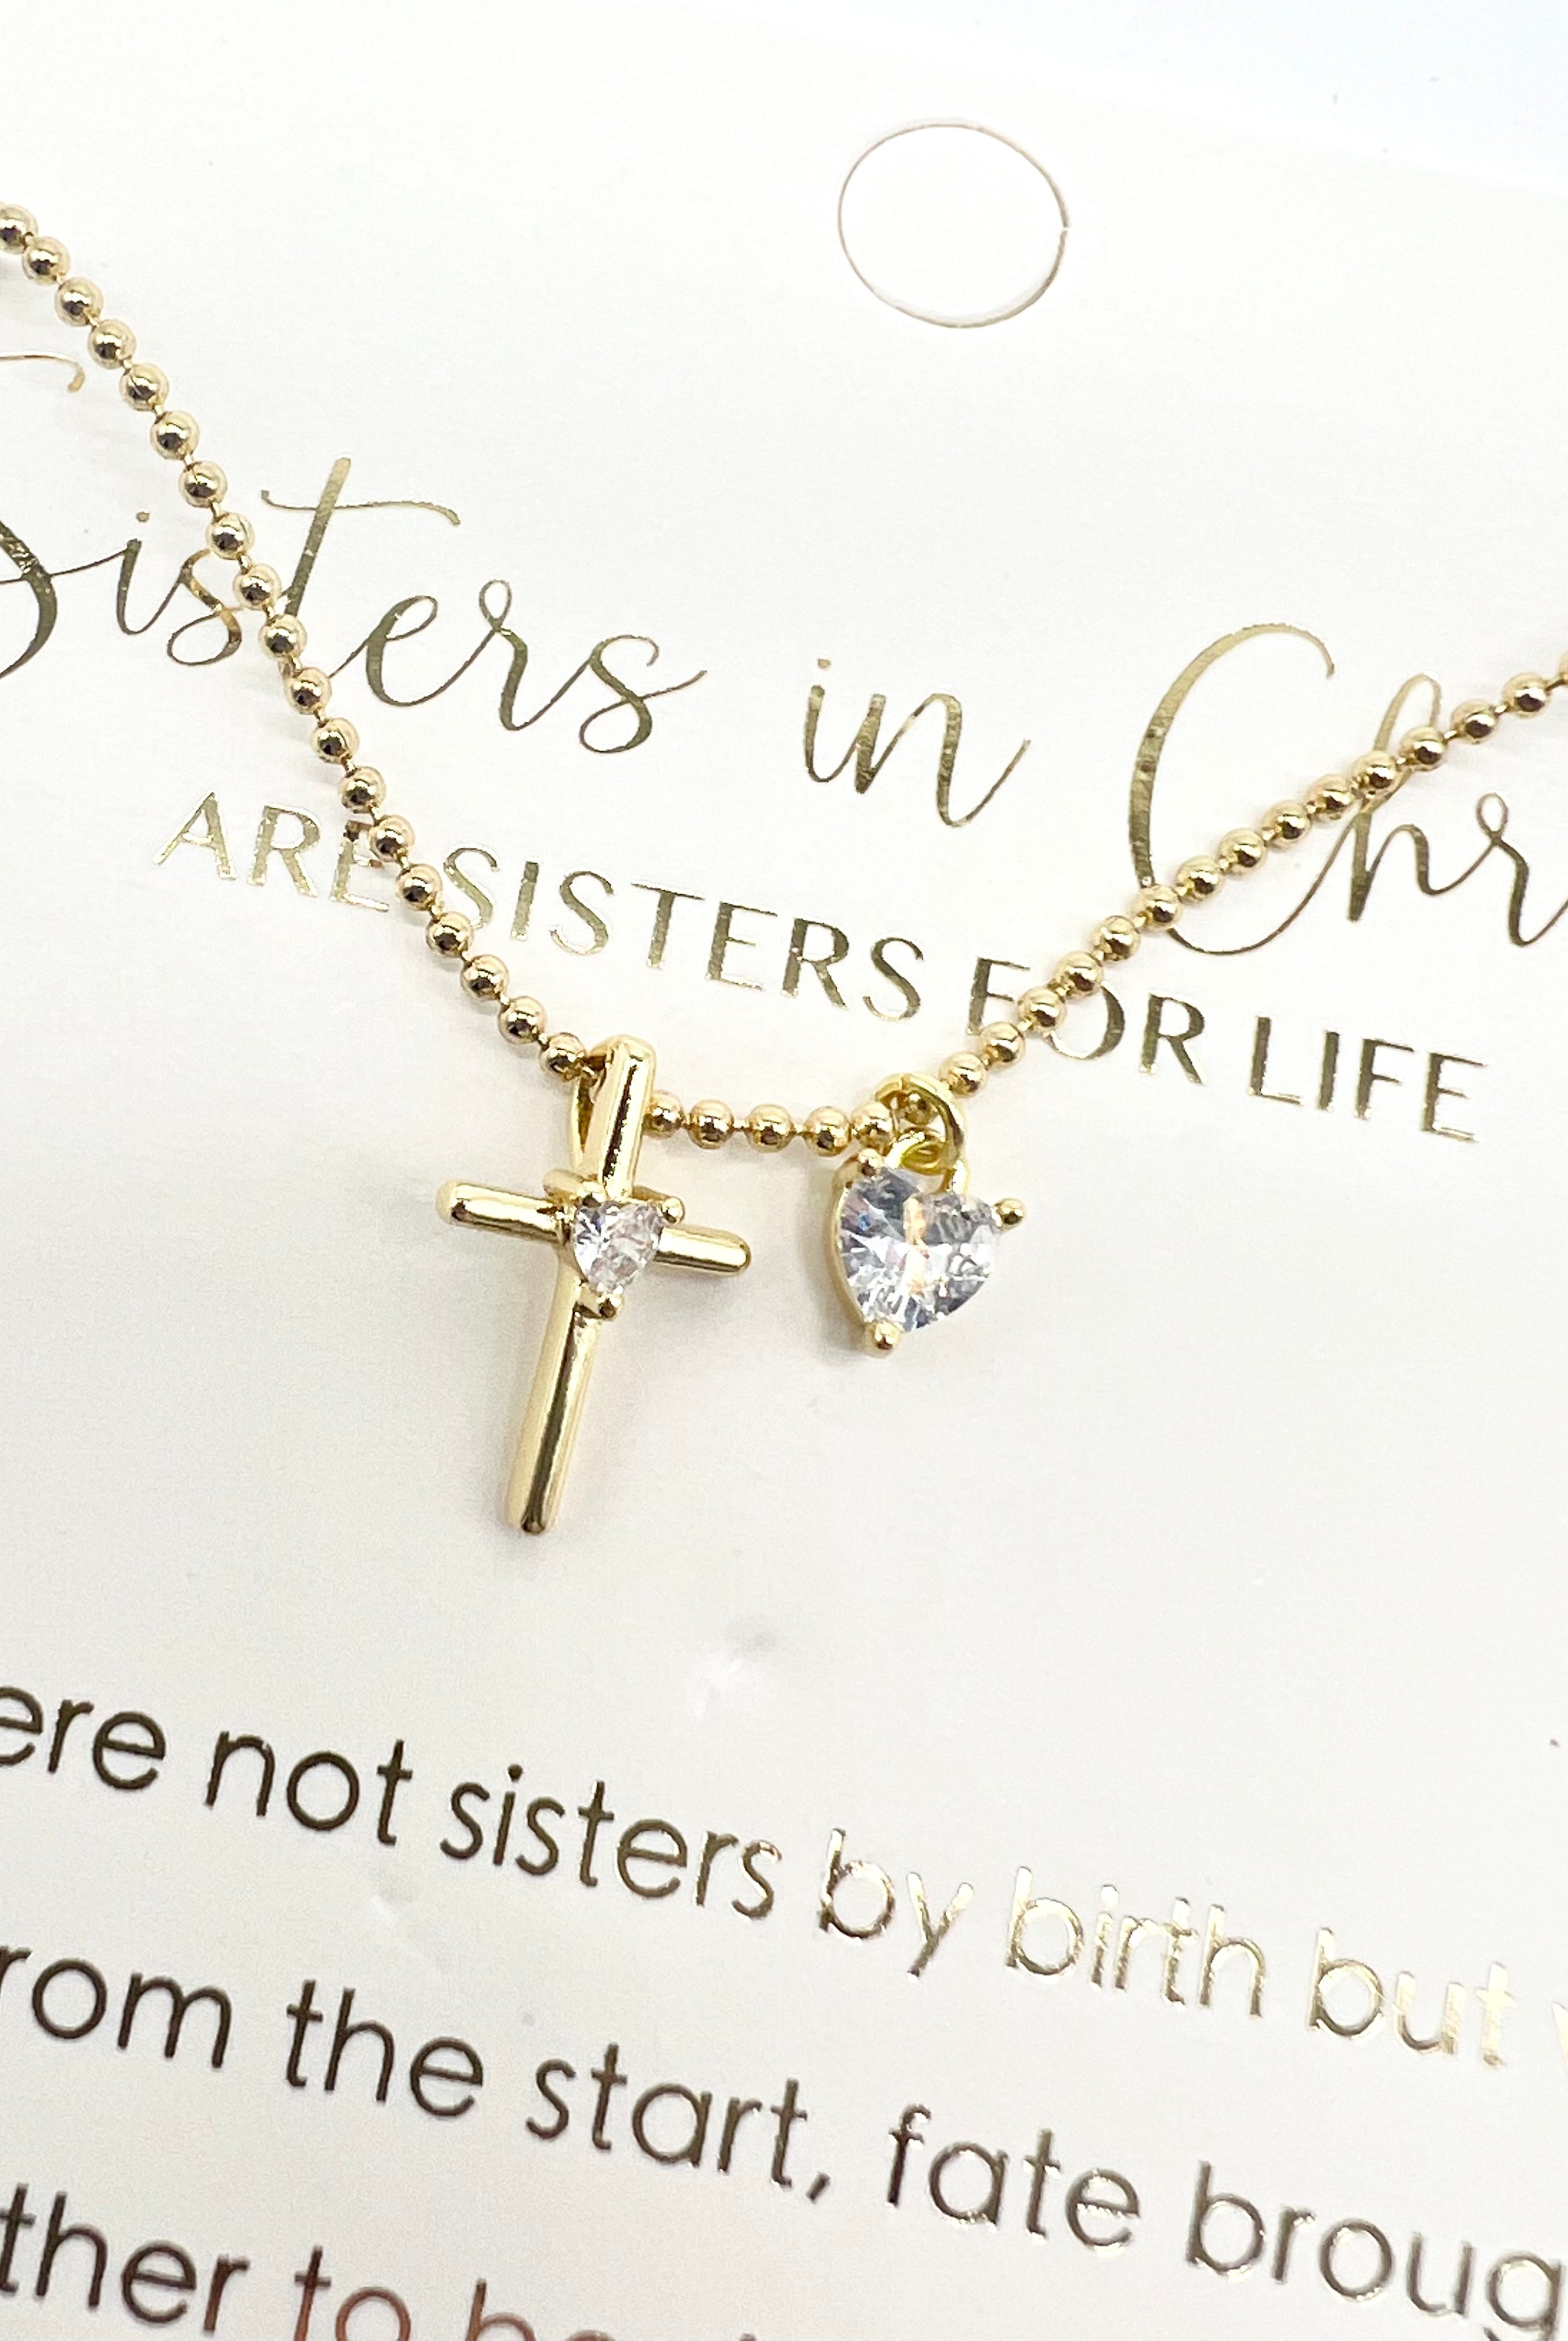 Sister's In Christ Necklace-310 Jewelry-Treasure Jewels-Heathered Boho Boutique, Women's Fashion and Accessories in Palmetto, FL